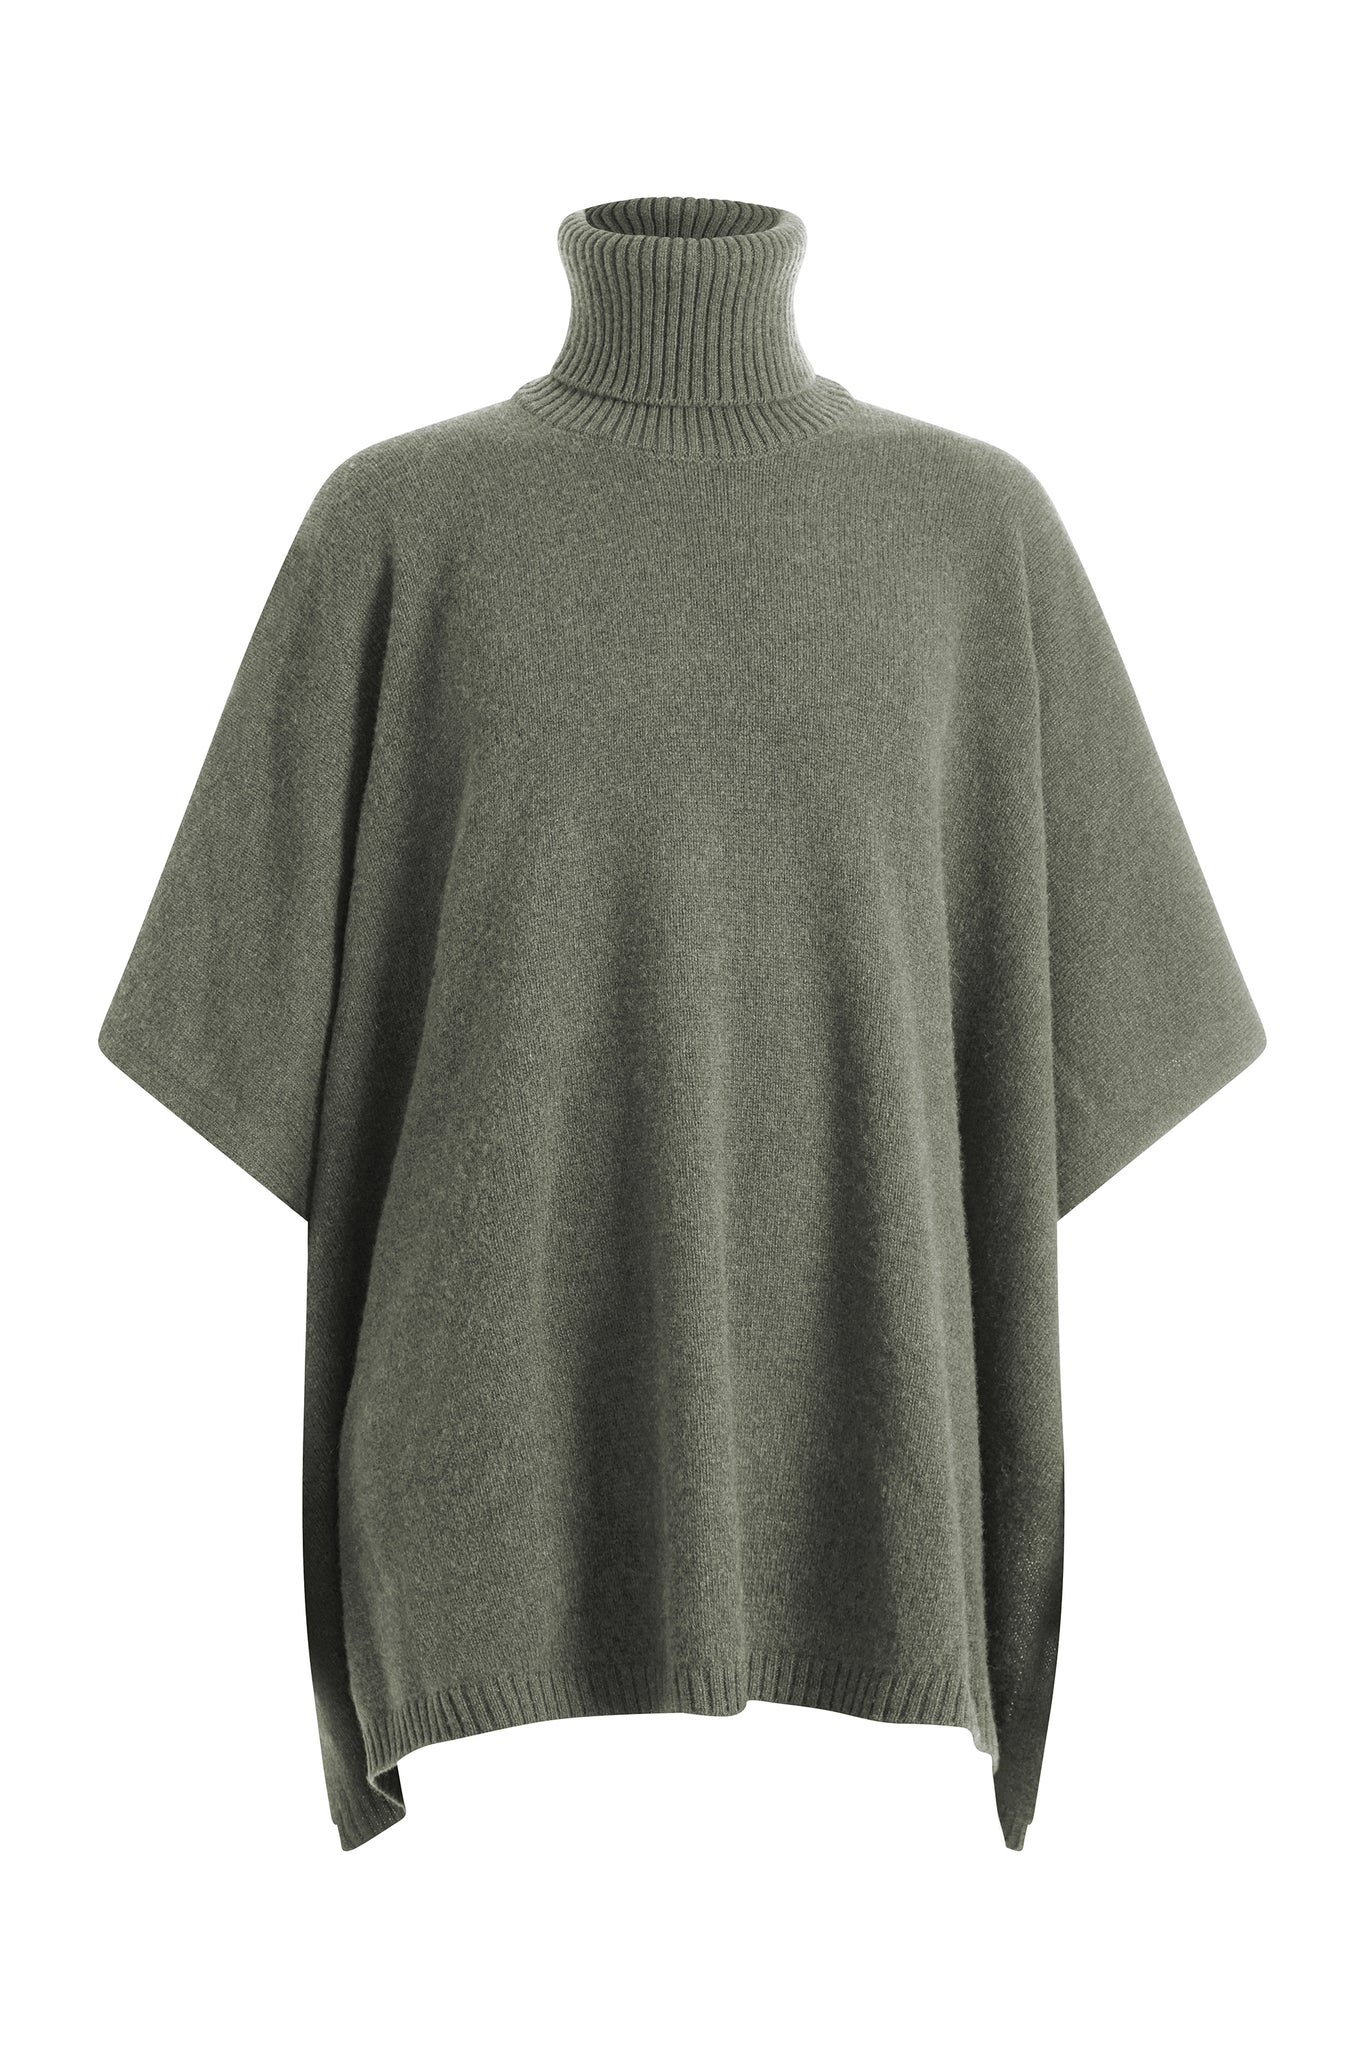 Grey Green cashmere poncho with turtle neck collar